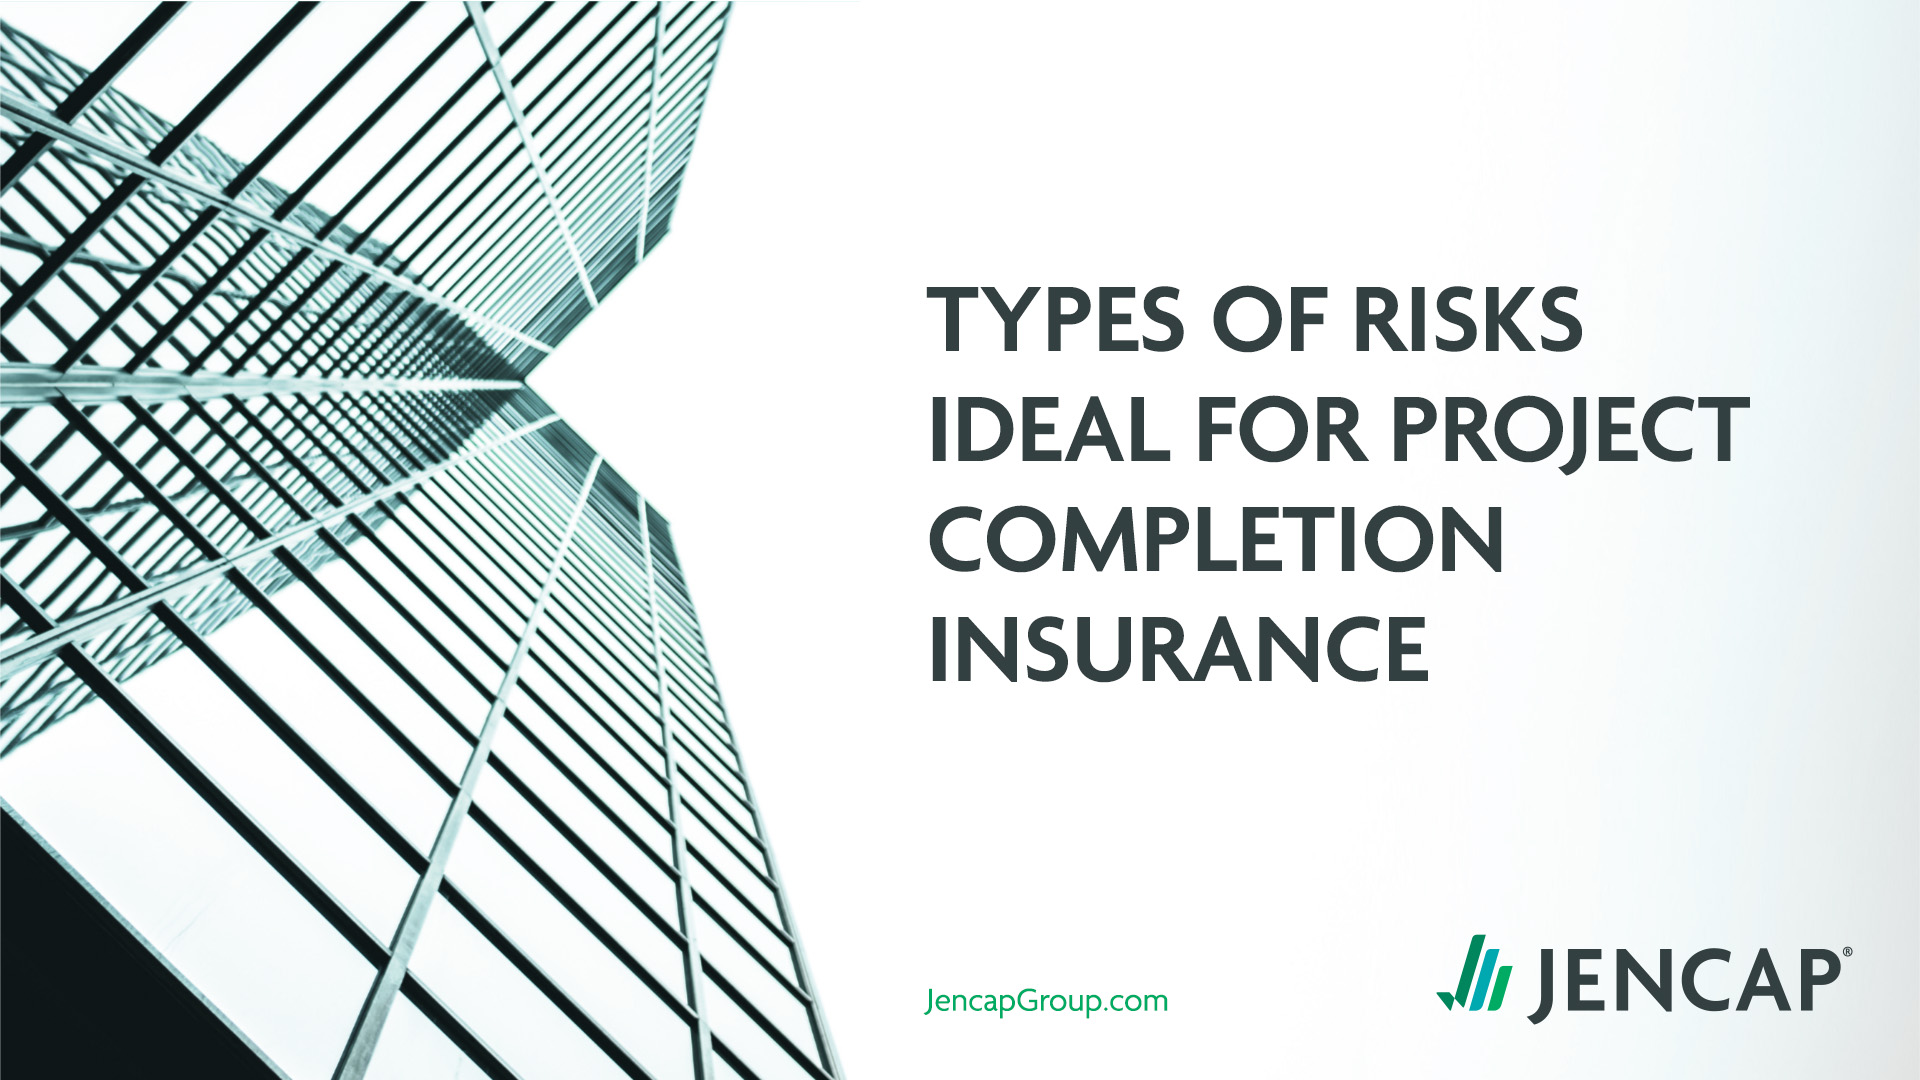 Types of Risks Ideal for Project Completion Insurance